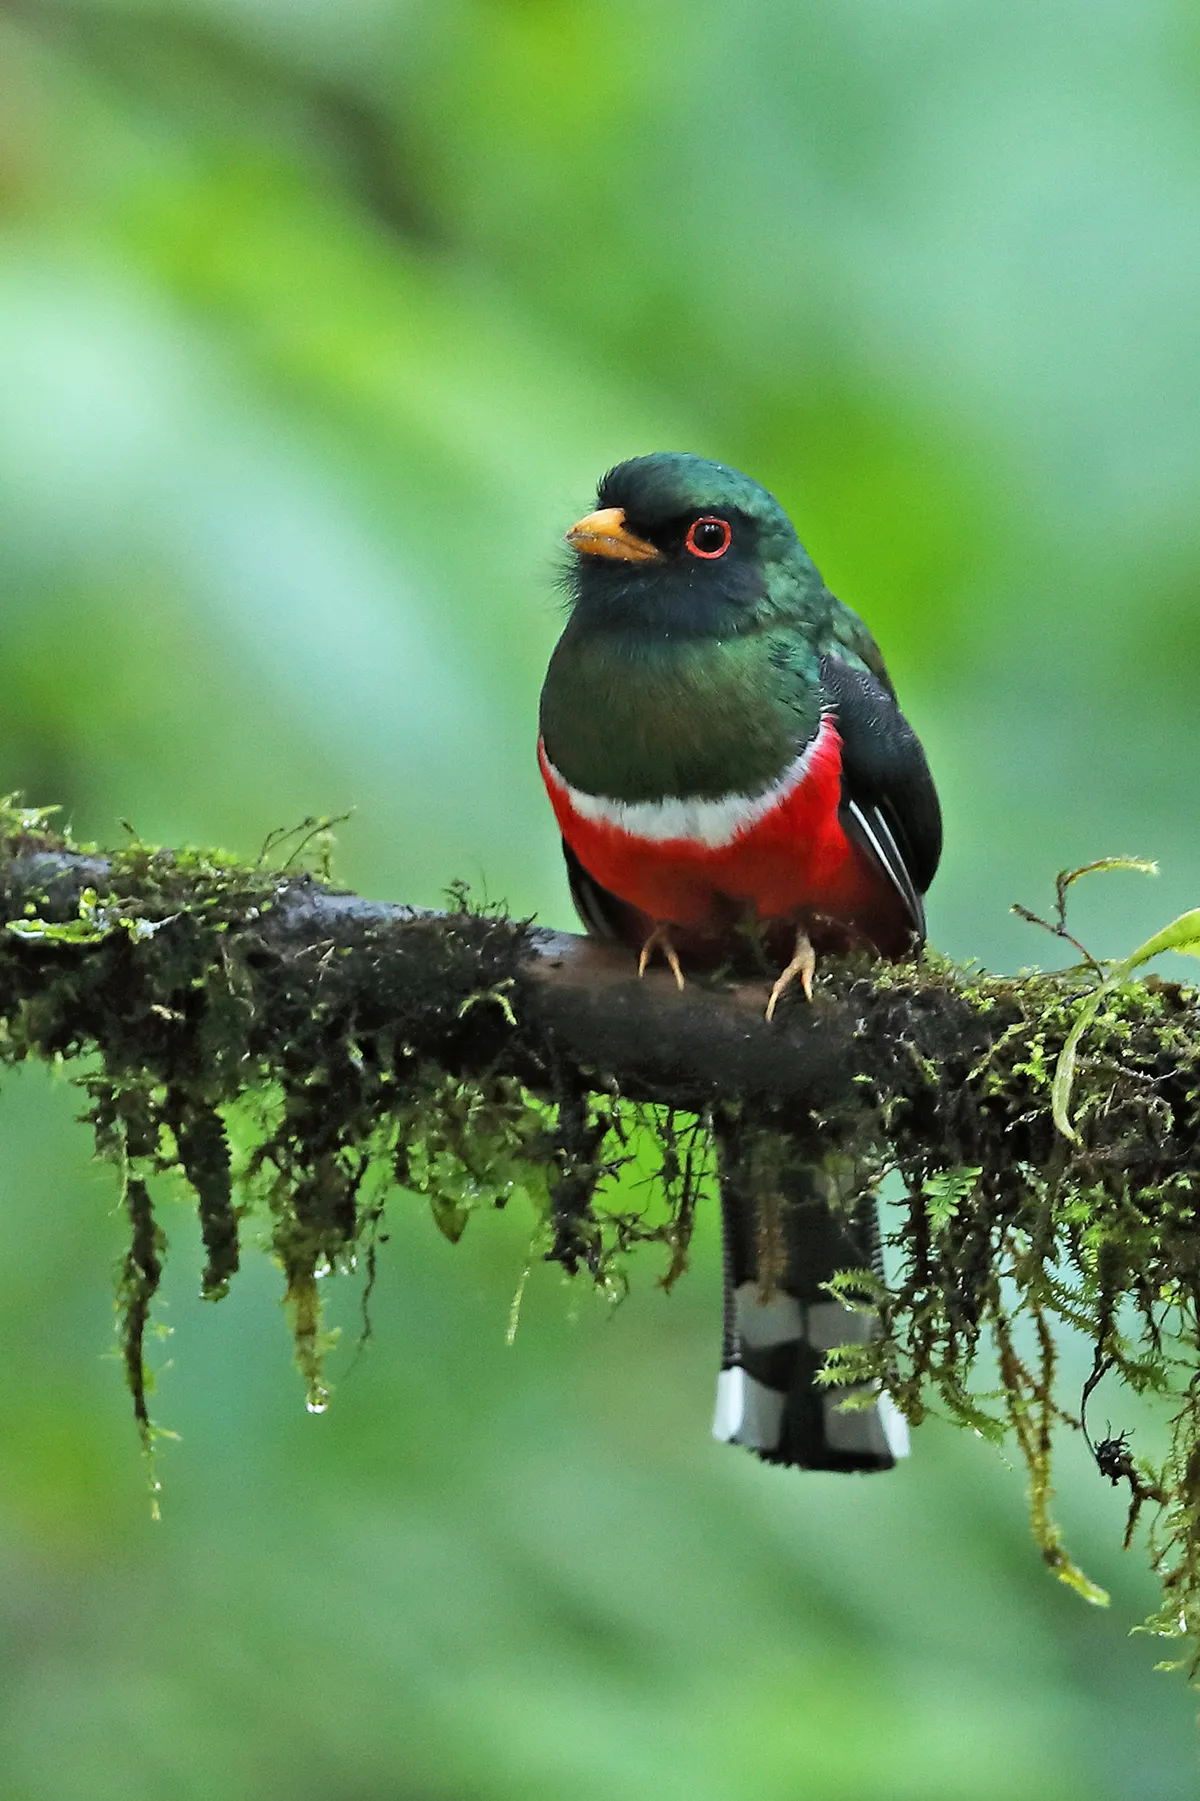 An adult male masked trogon (Trogon personatus assimilis) perched on mossy branch. © Neil Bowman/Getty.